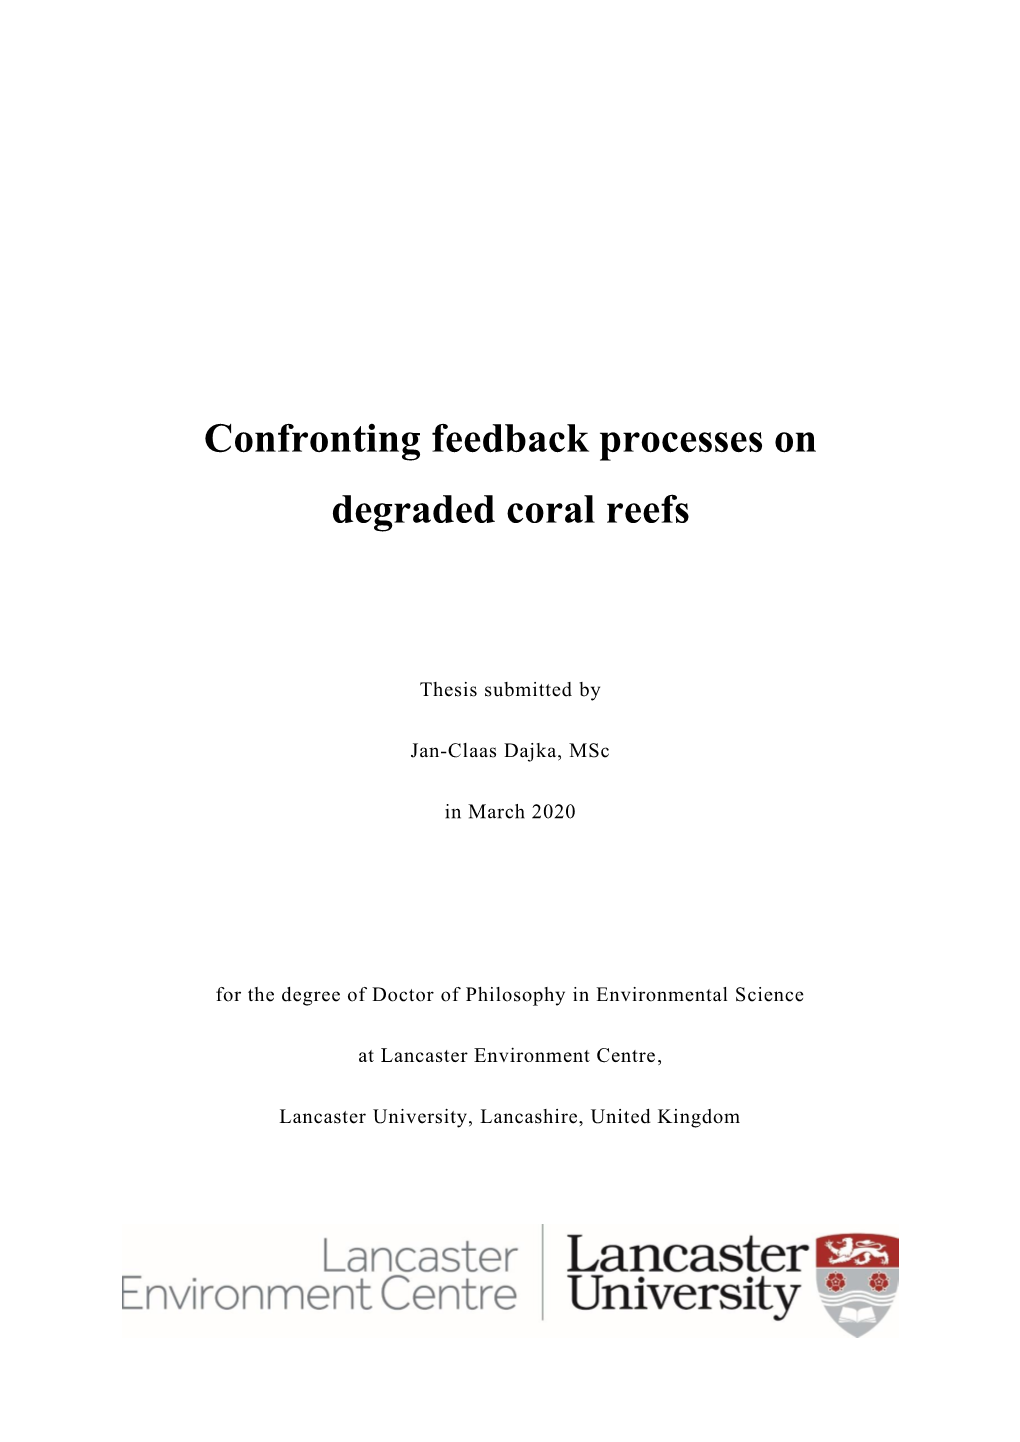 Confronting Feedback Processes on Degraded Coral Reefs